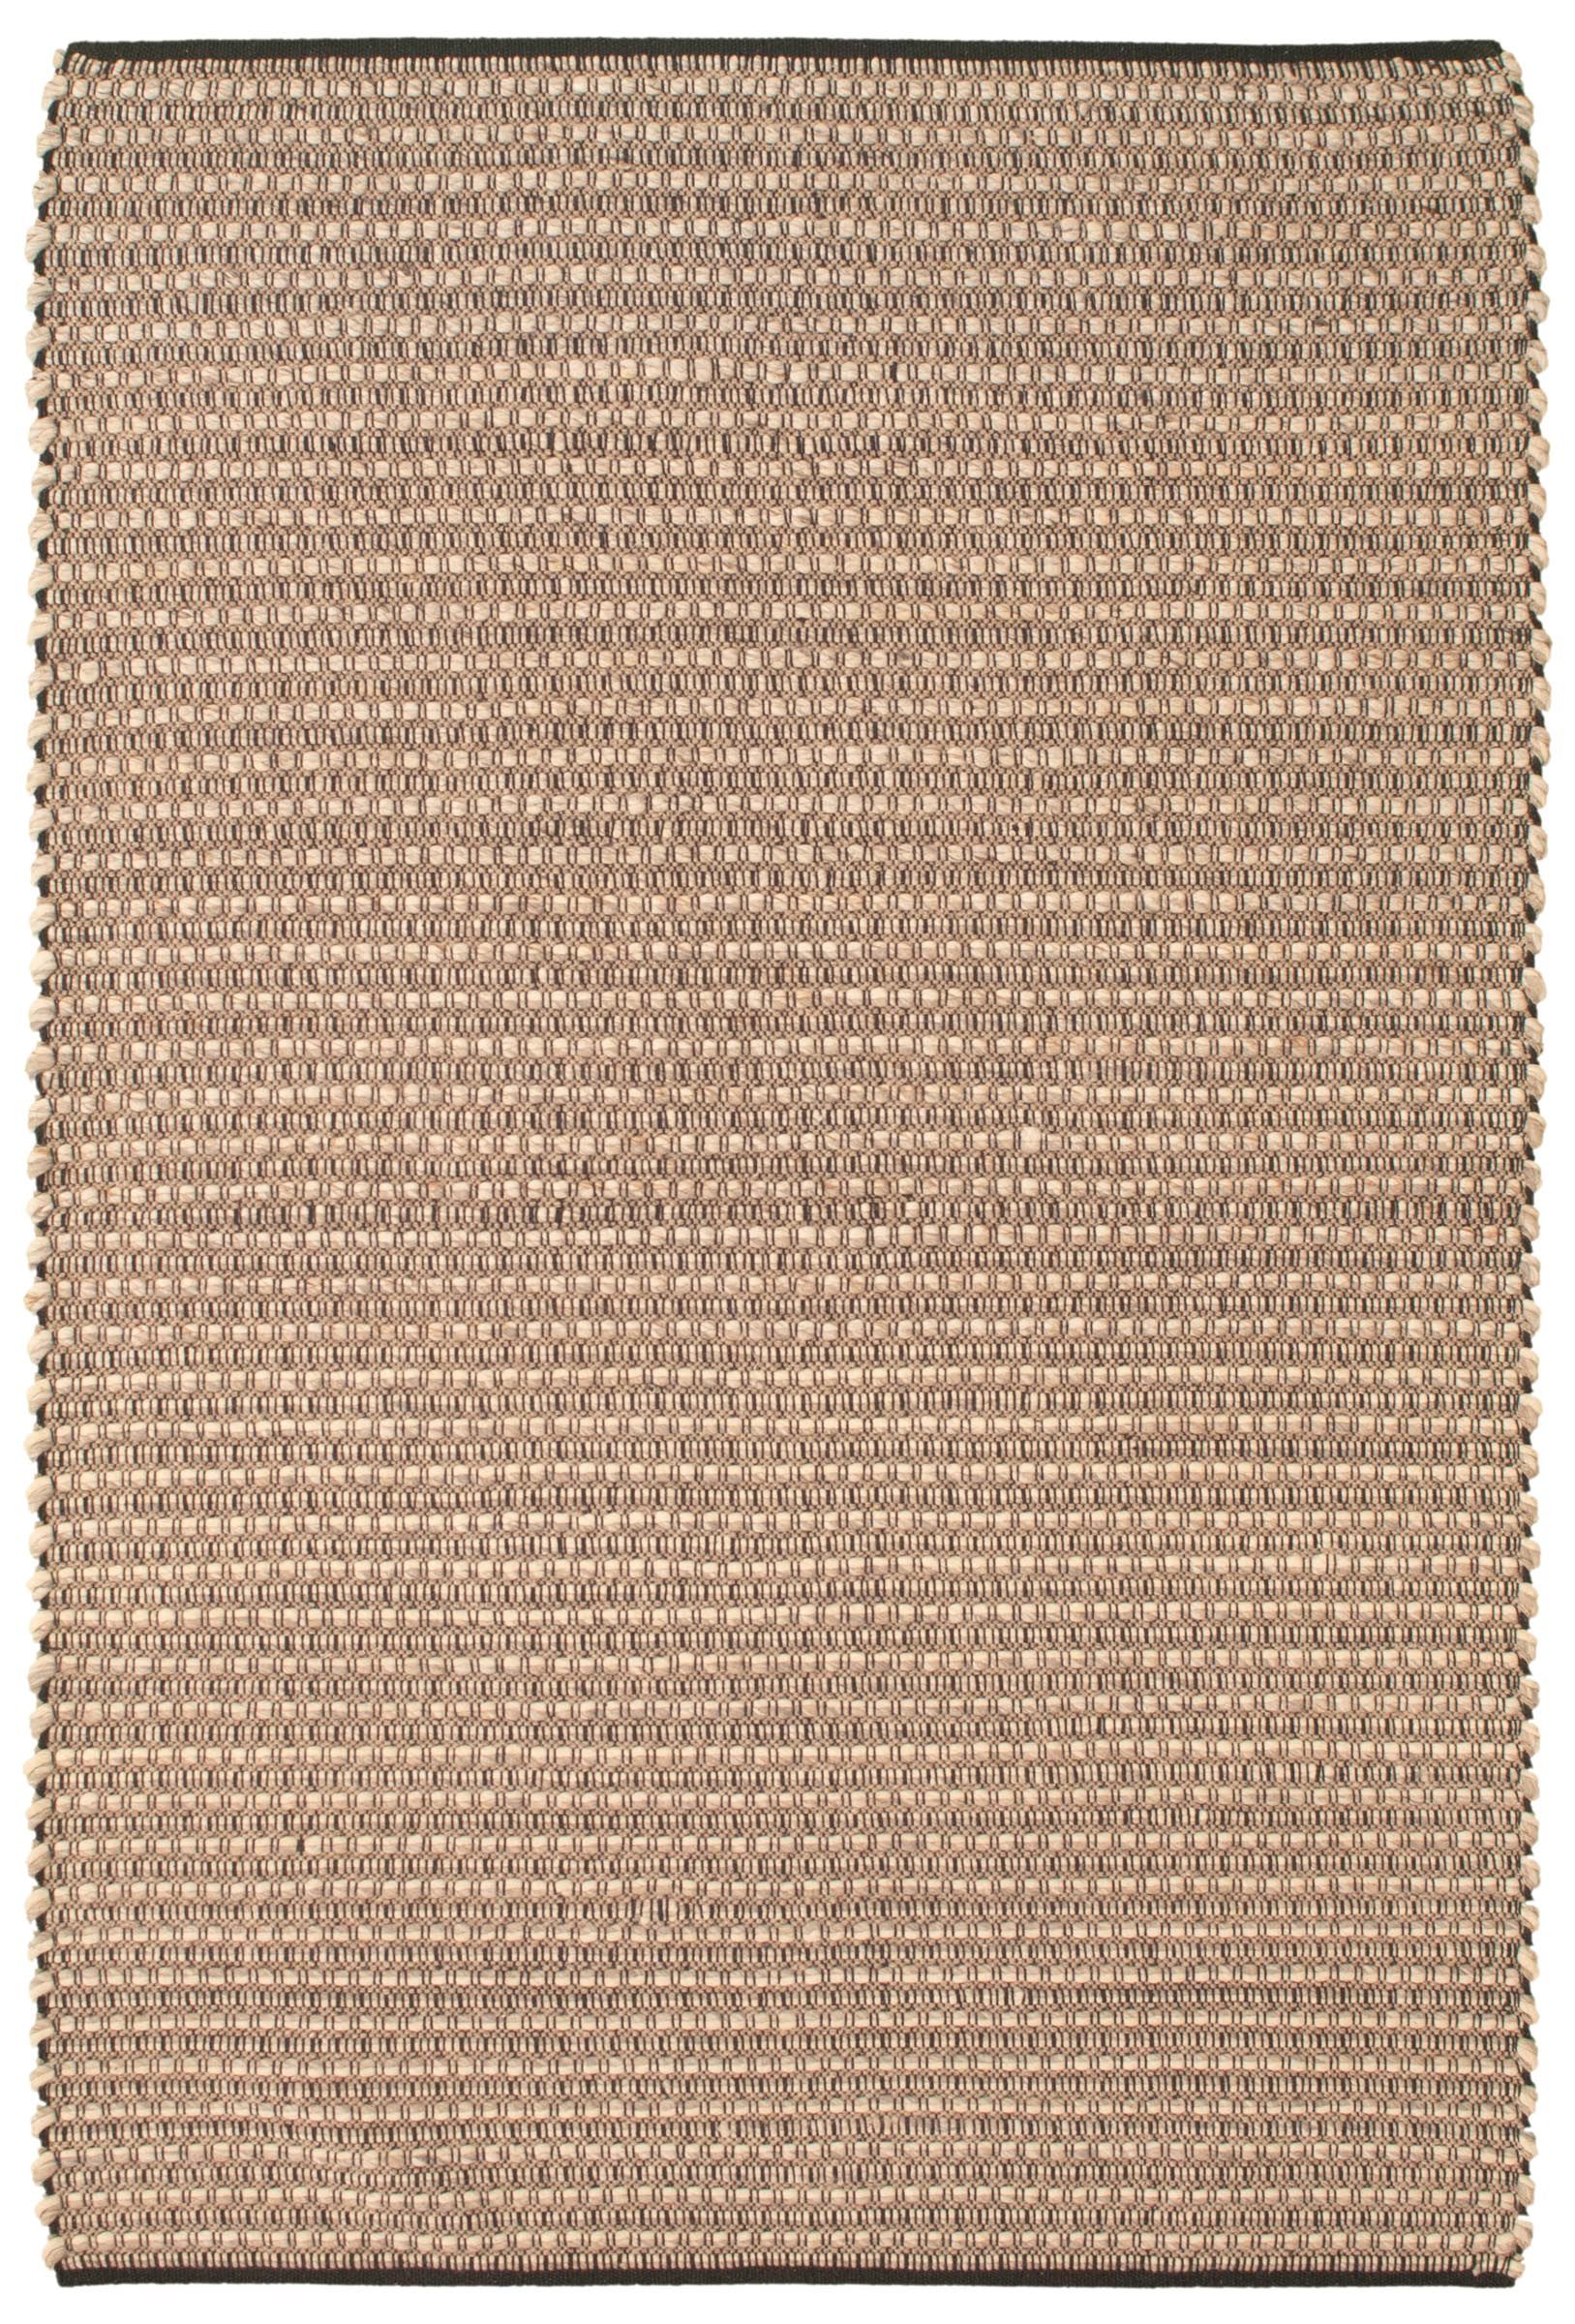 340235 Sienna Braided Brown Rug 5'3 x 7'11 eCarpet Gallery Hand-Knotted Bedroom Area Rug for Living Room 